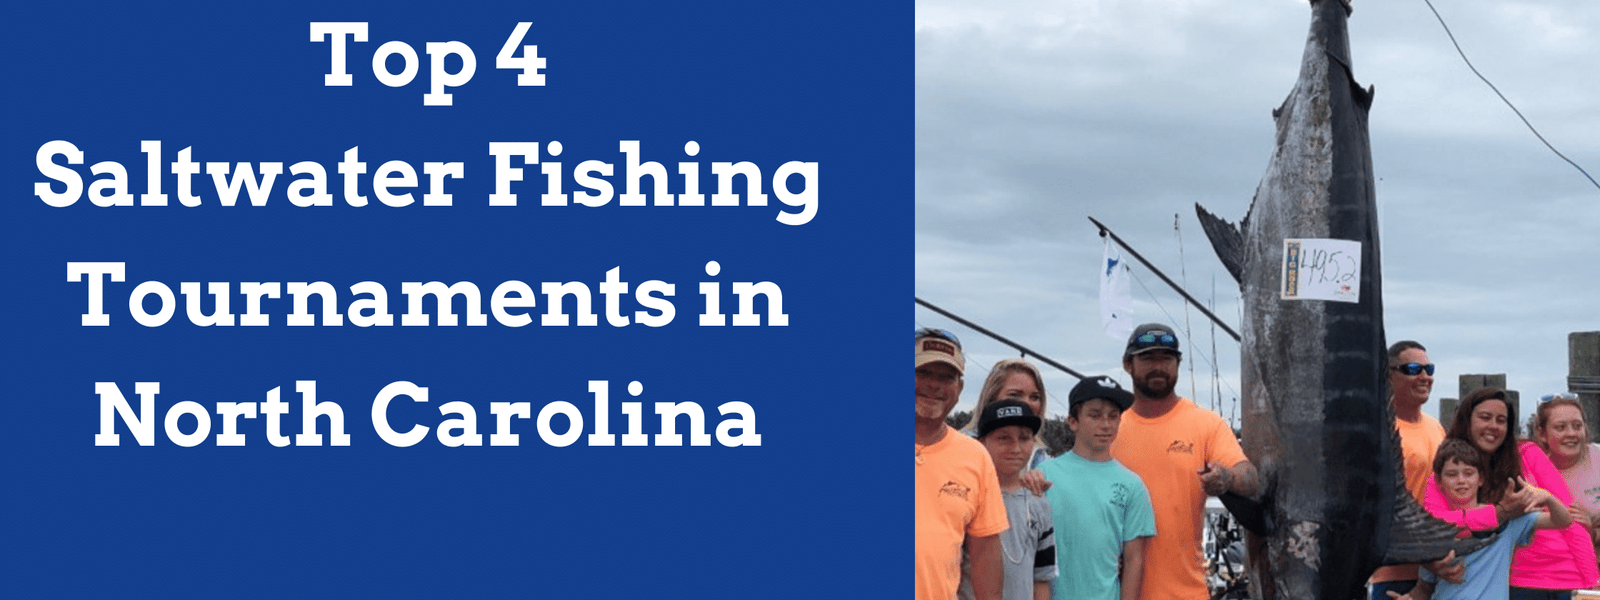 The Top 4 Saltwater Fishing Tournaments in North Carolina